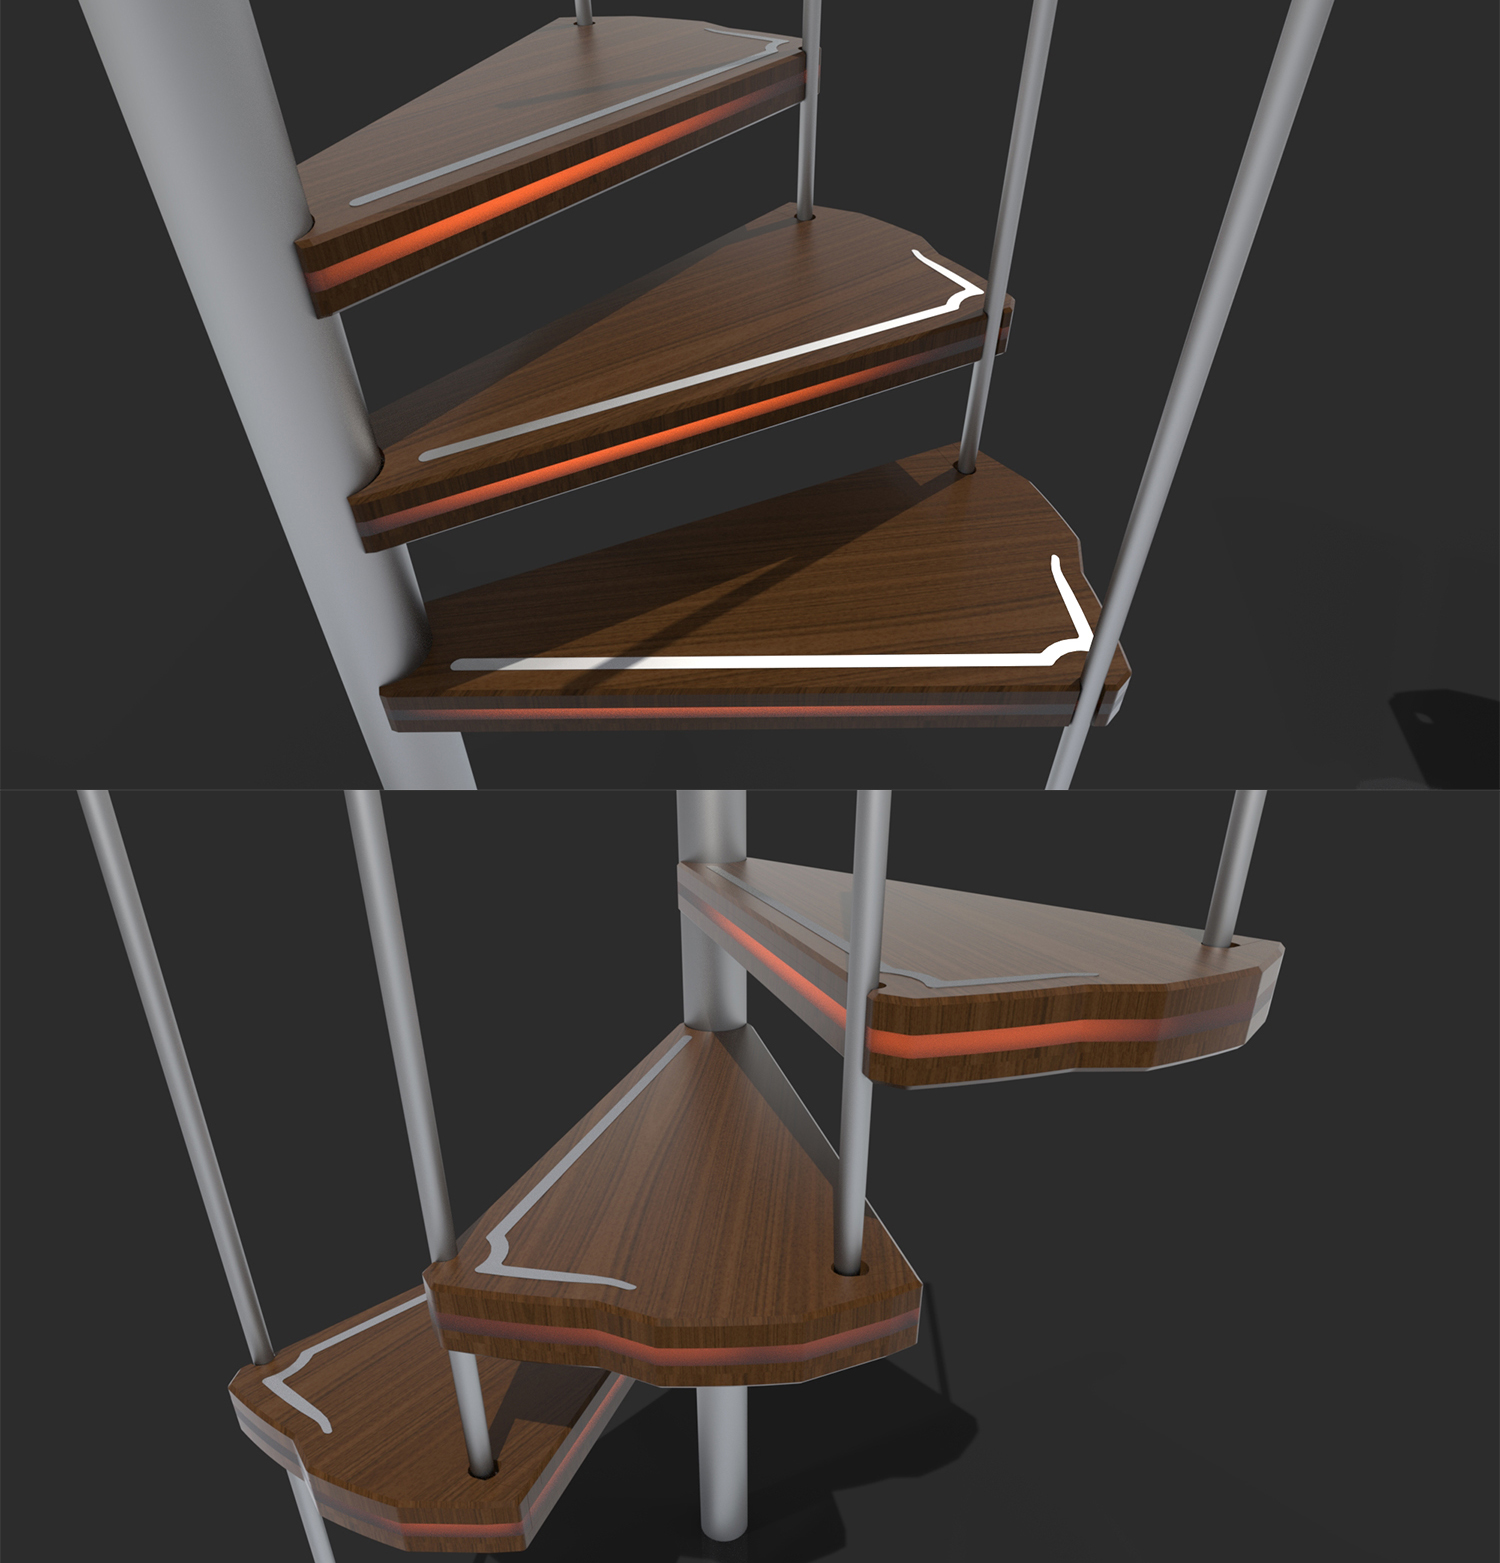 3d model of wood and metal winding stairs